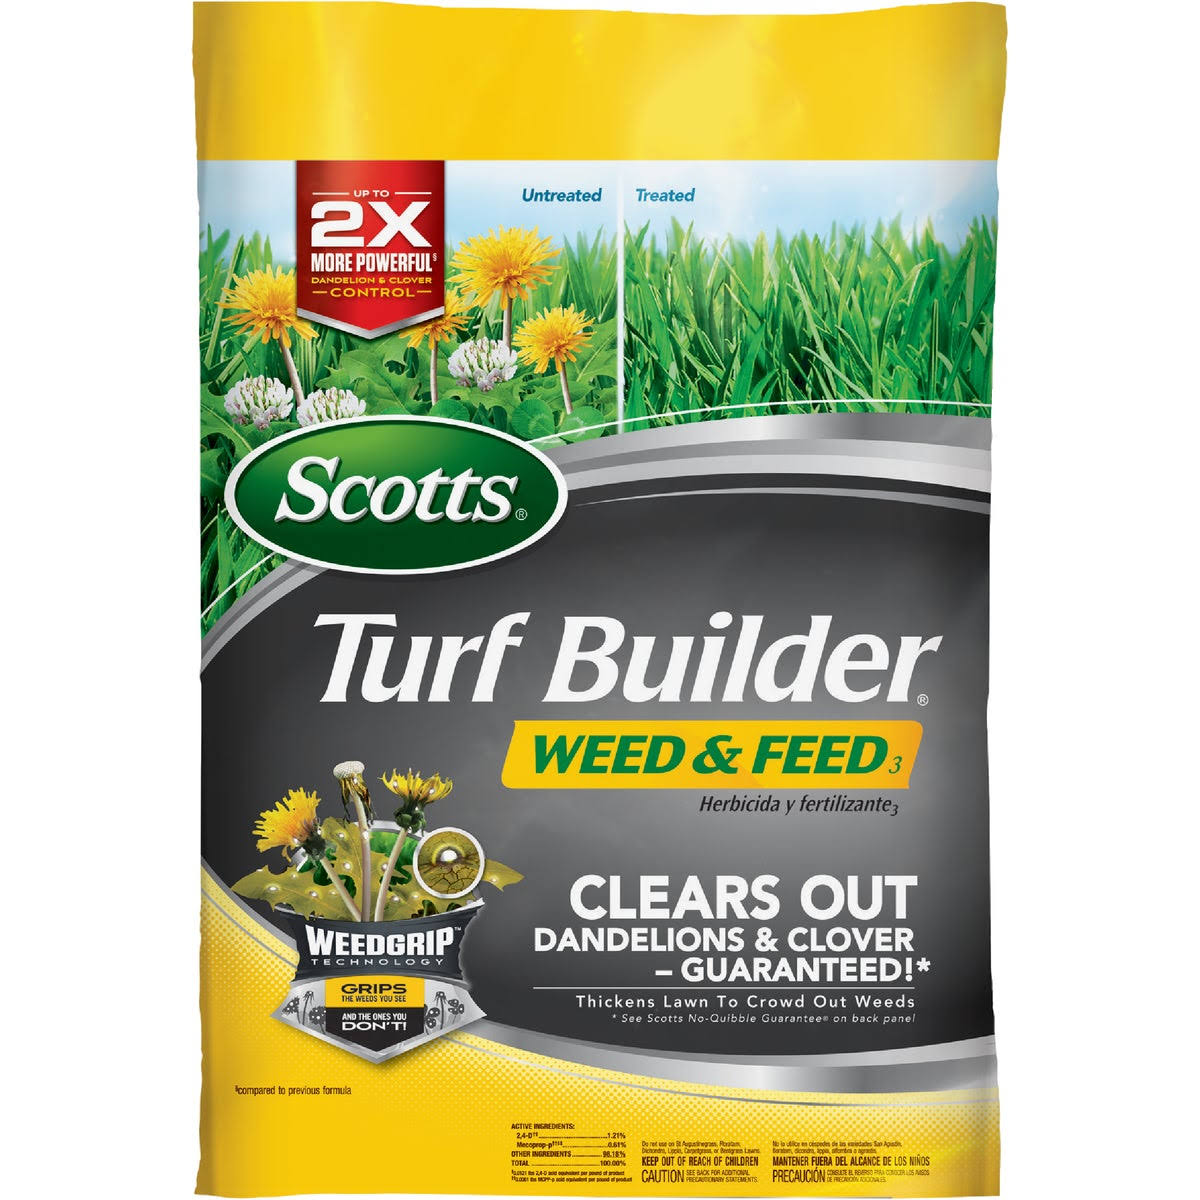 Scotts 5M Turf Builder Weed and Feed Fertilizer - 15lb